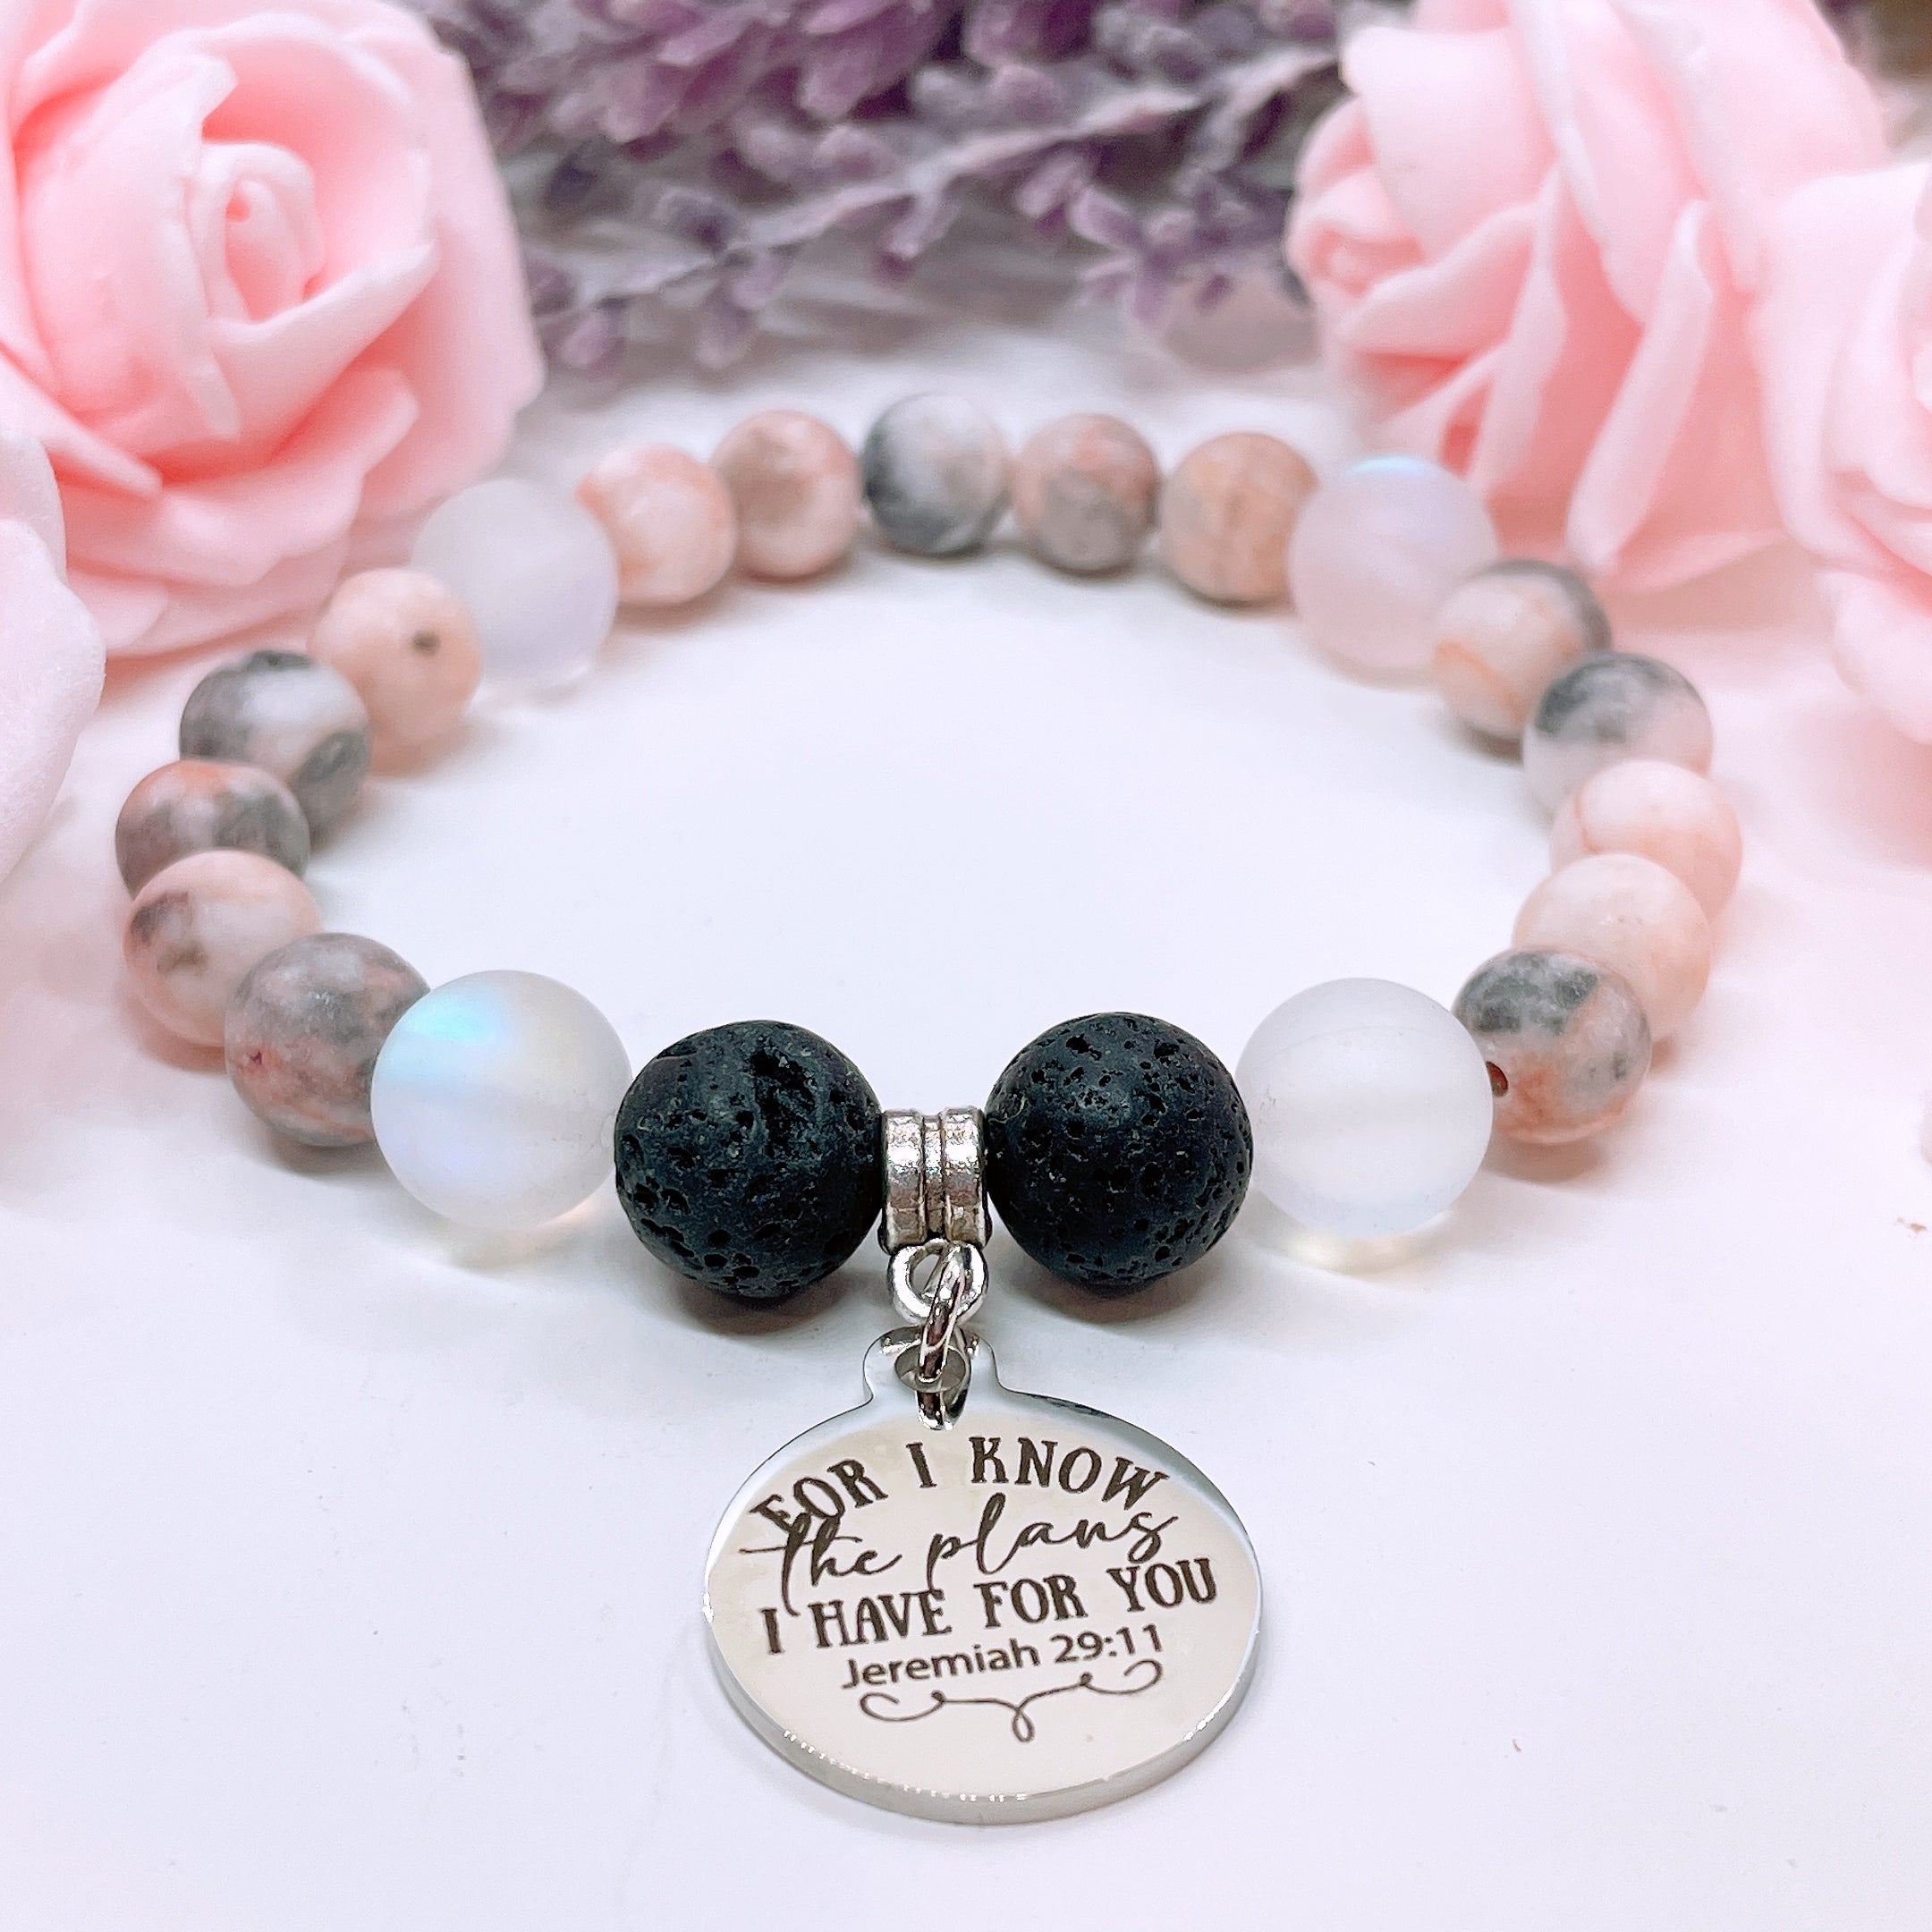 For I Know the Plans I have for You Charm Bracelet Lava